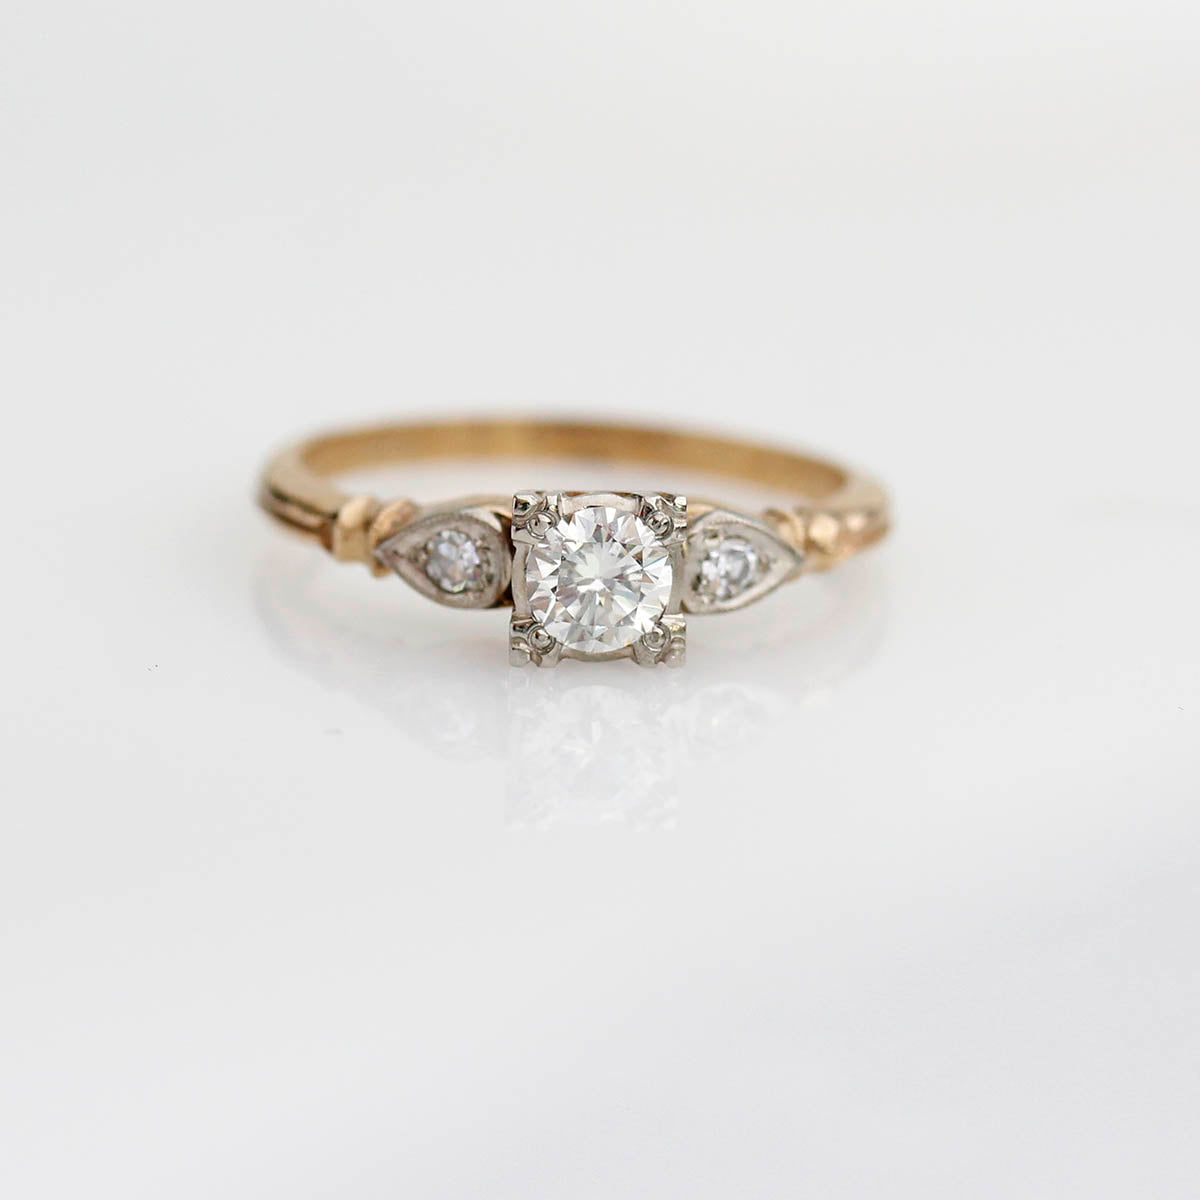 Circa 1940s two tone gold Engagement Ring #R570-09 - Leigh Jay & Co.